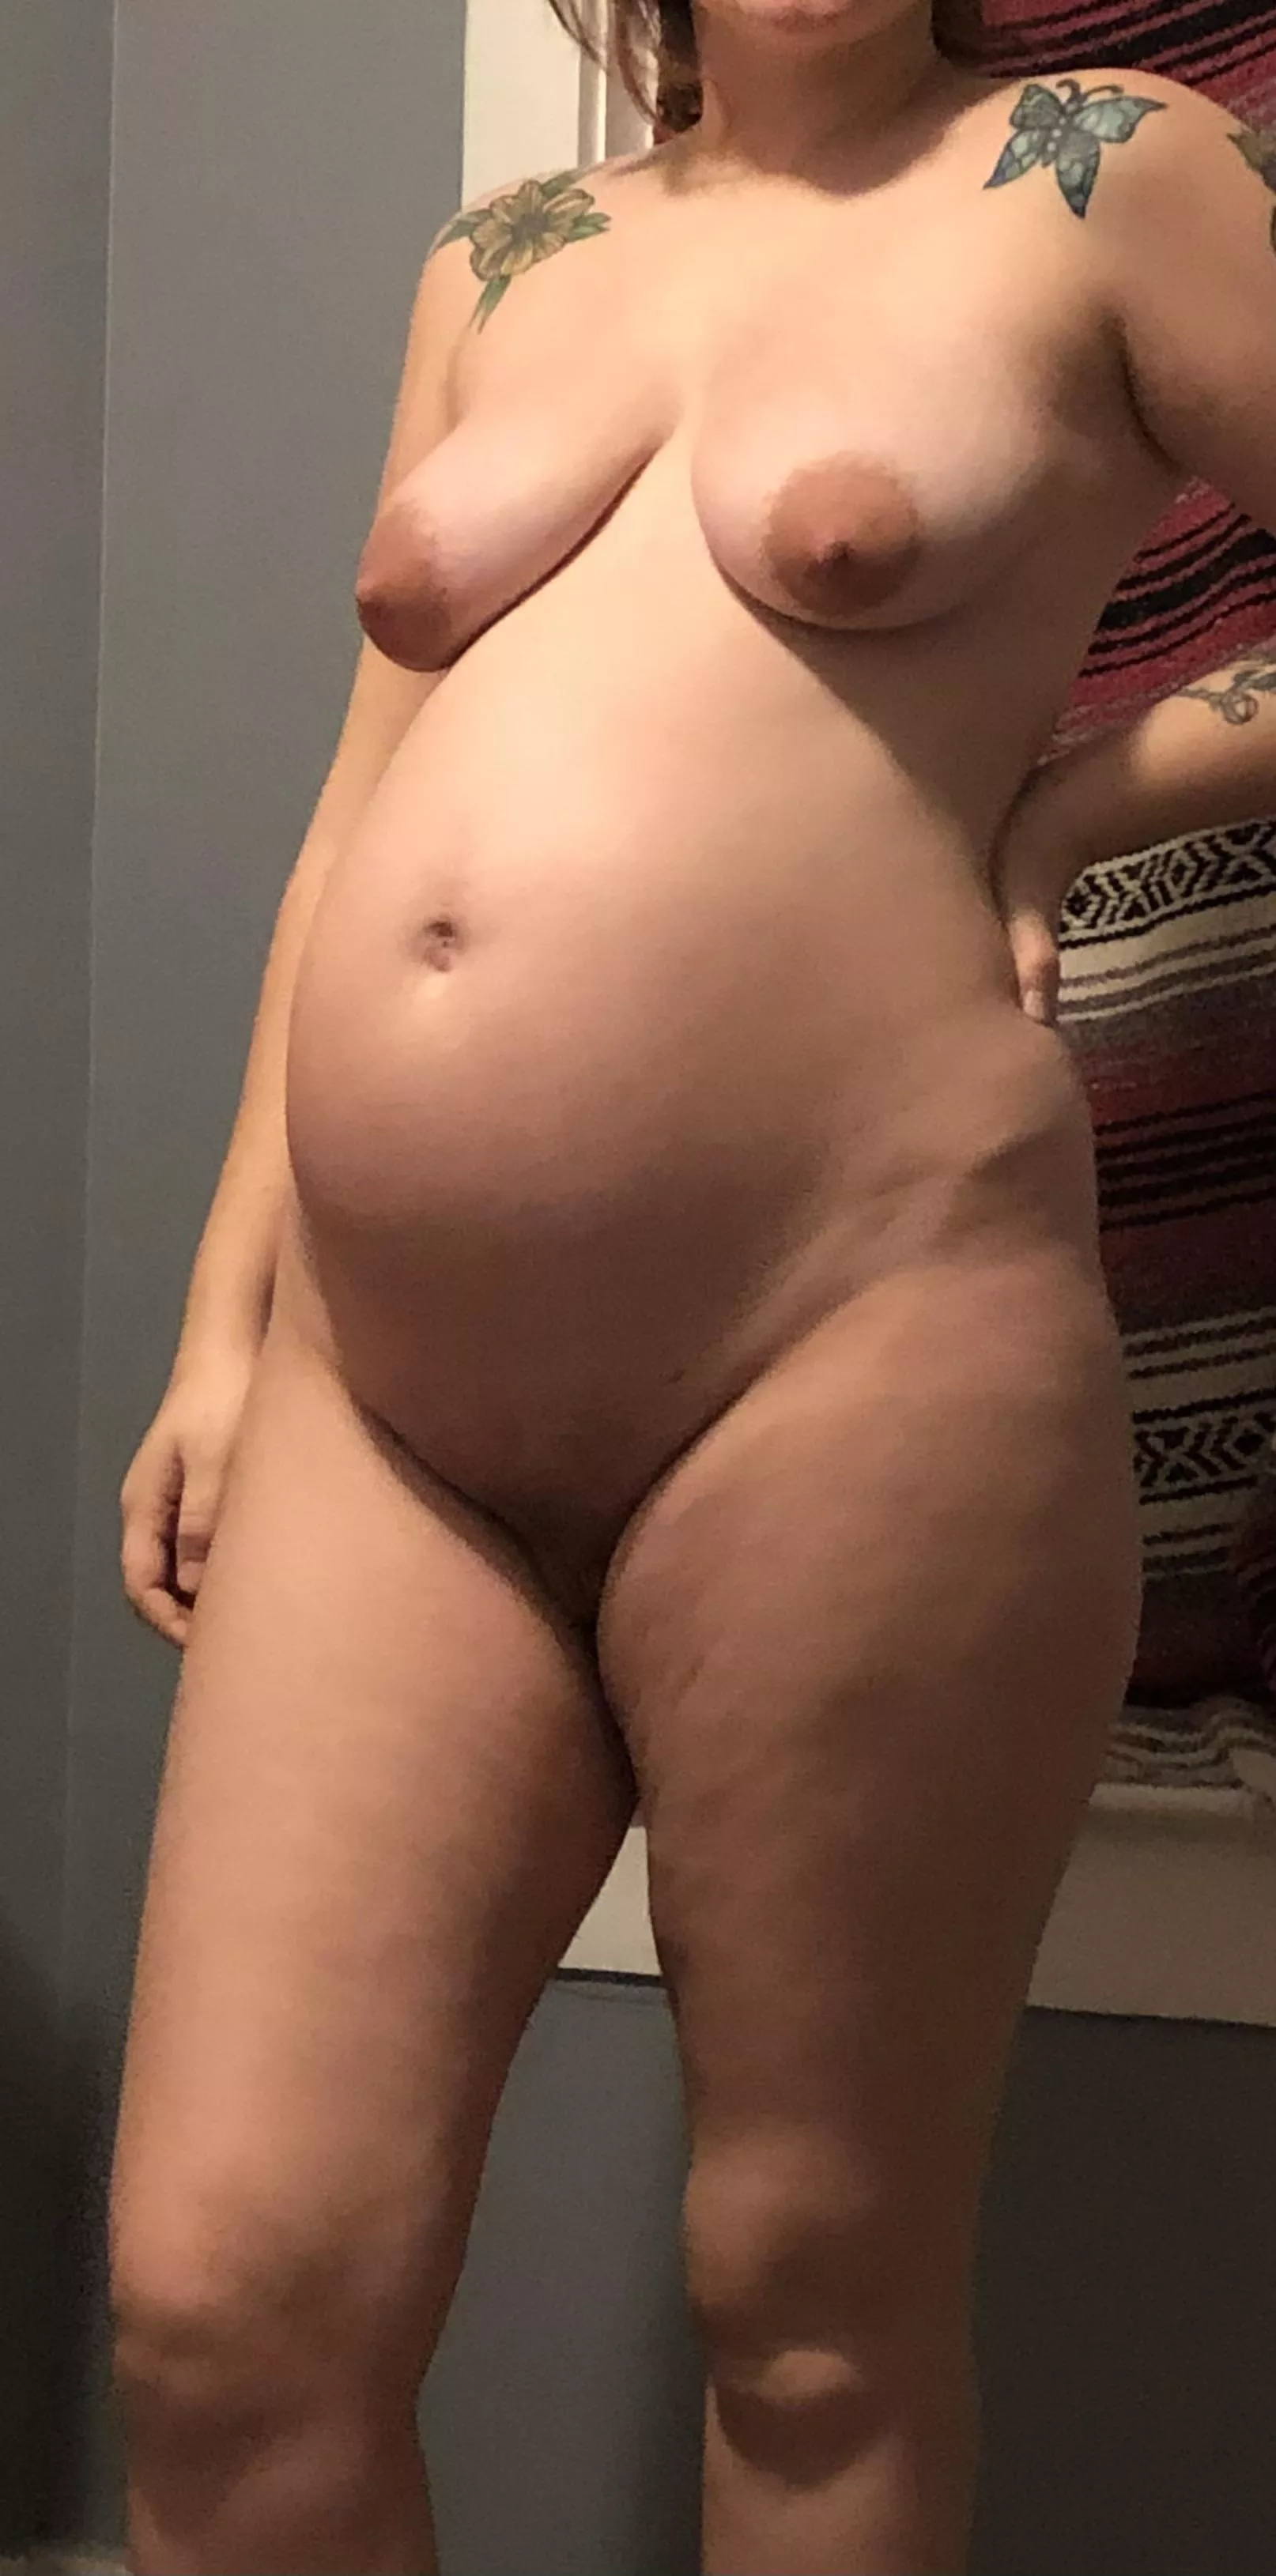 26 weeks pregnant nudes in preggo Onlynudes pic